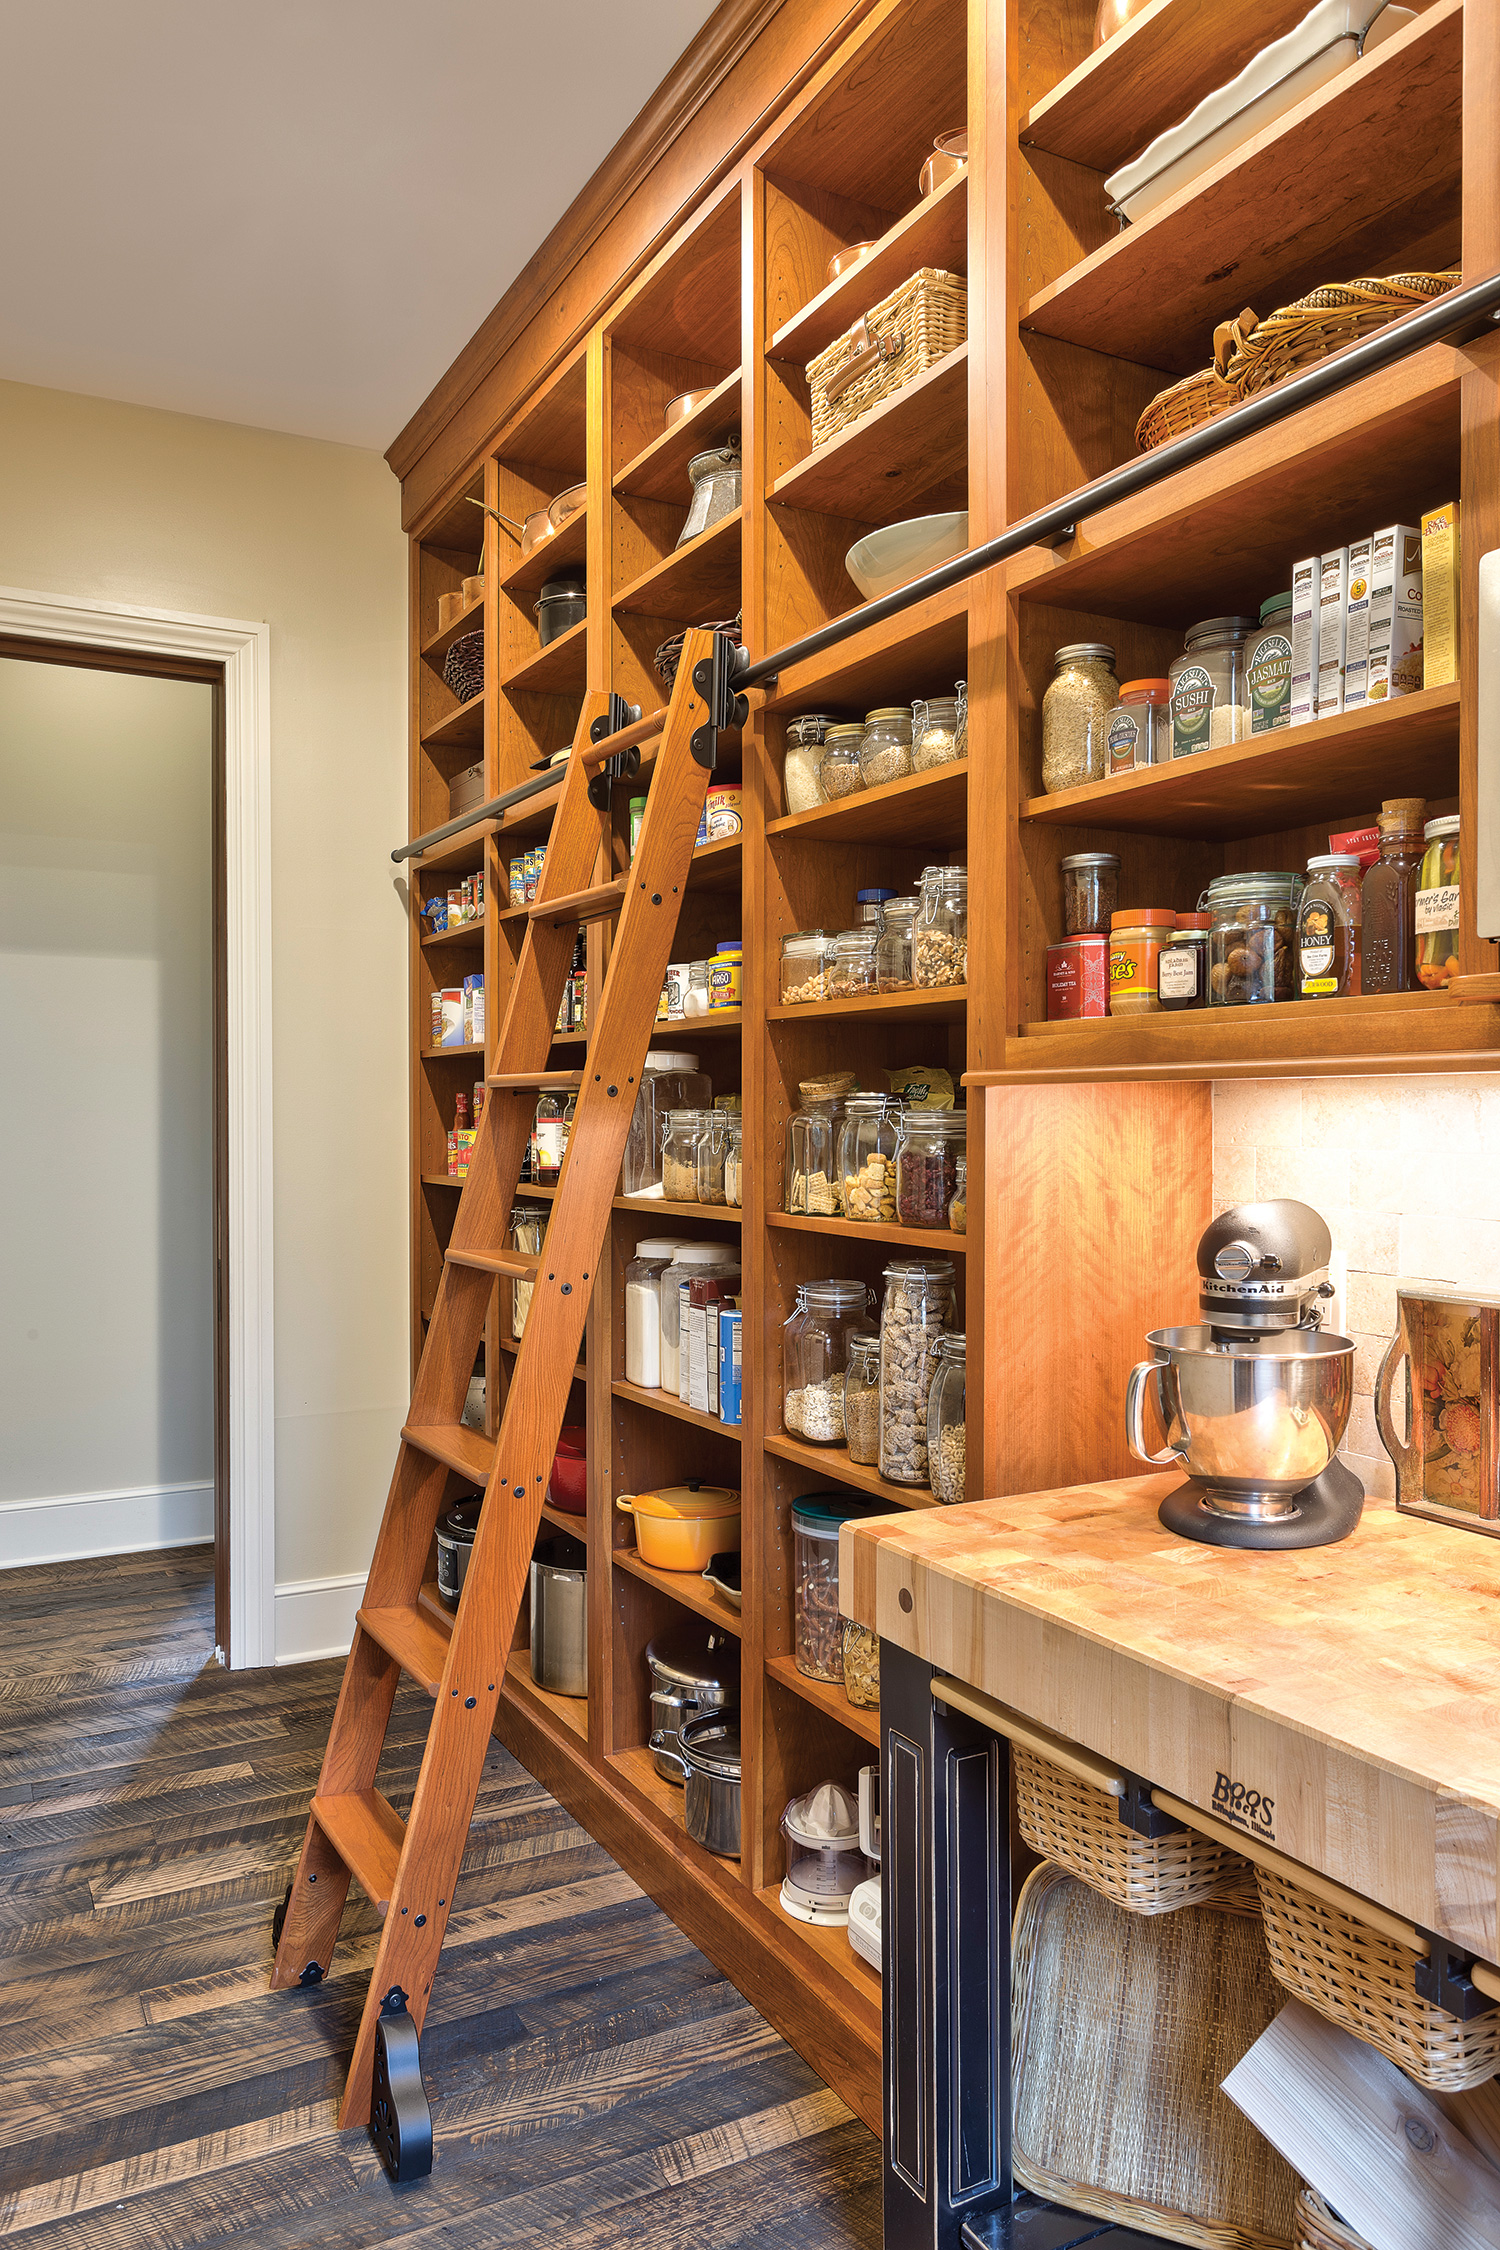 This roomy pantry, adjacent to a farmhouse-inspired kitchen, has open shelves of stained alder with a library ladder. Photo by Kevin Meechan.